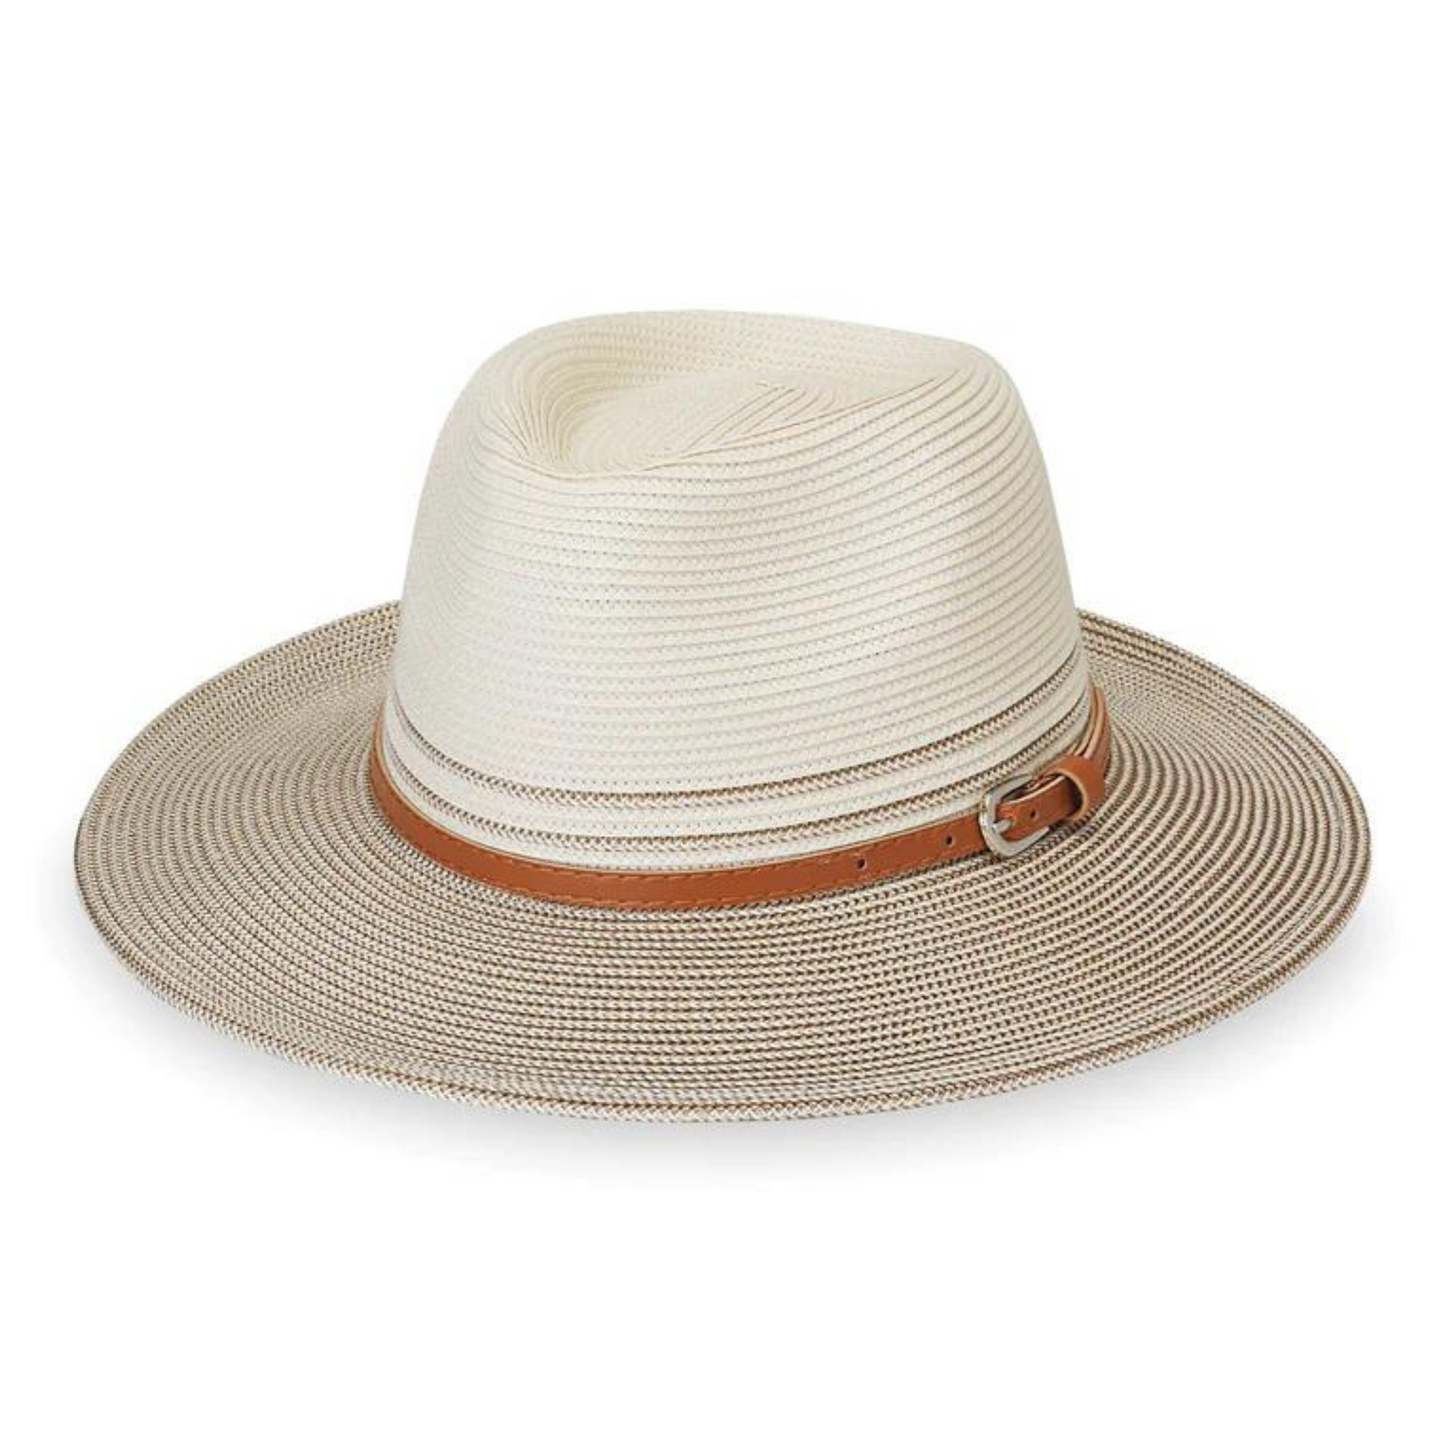 A front view of a cream and light brown weaved hat with a light brown band.